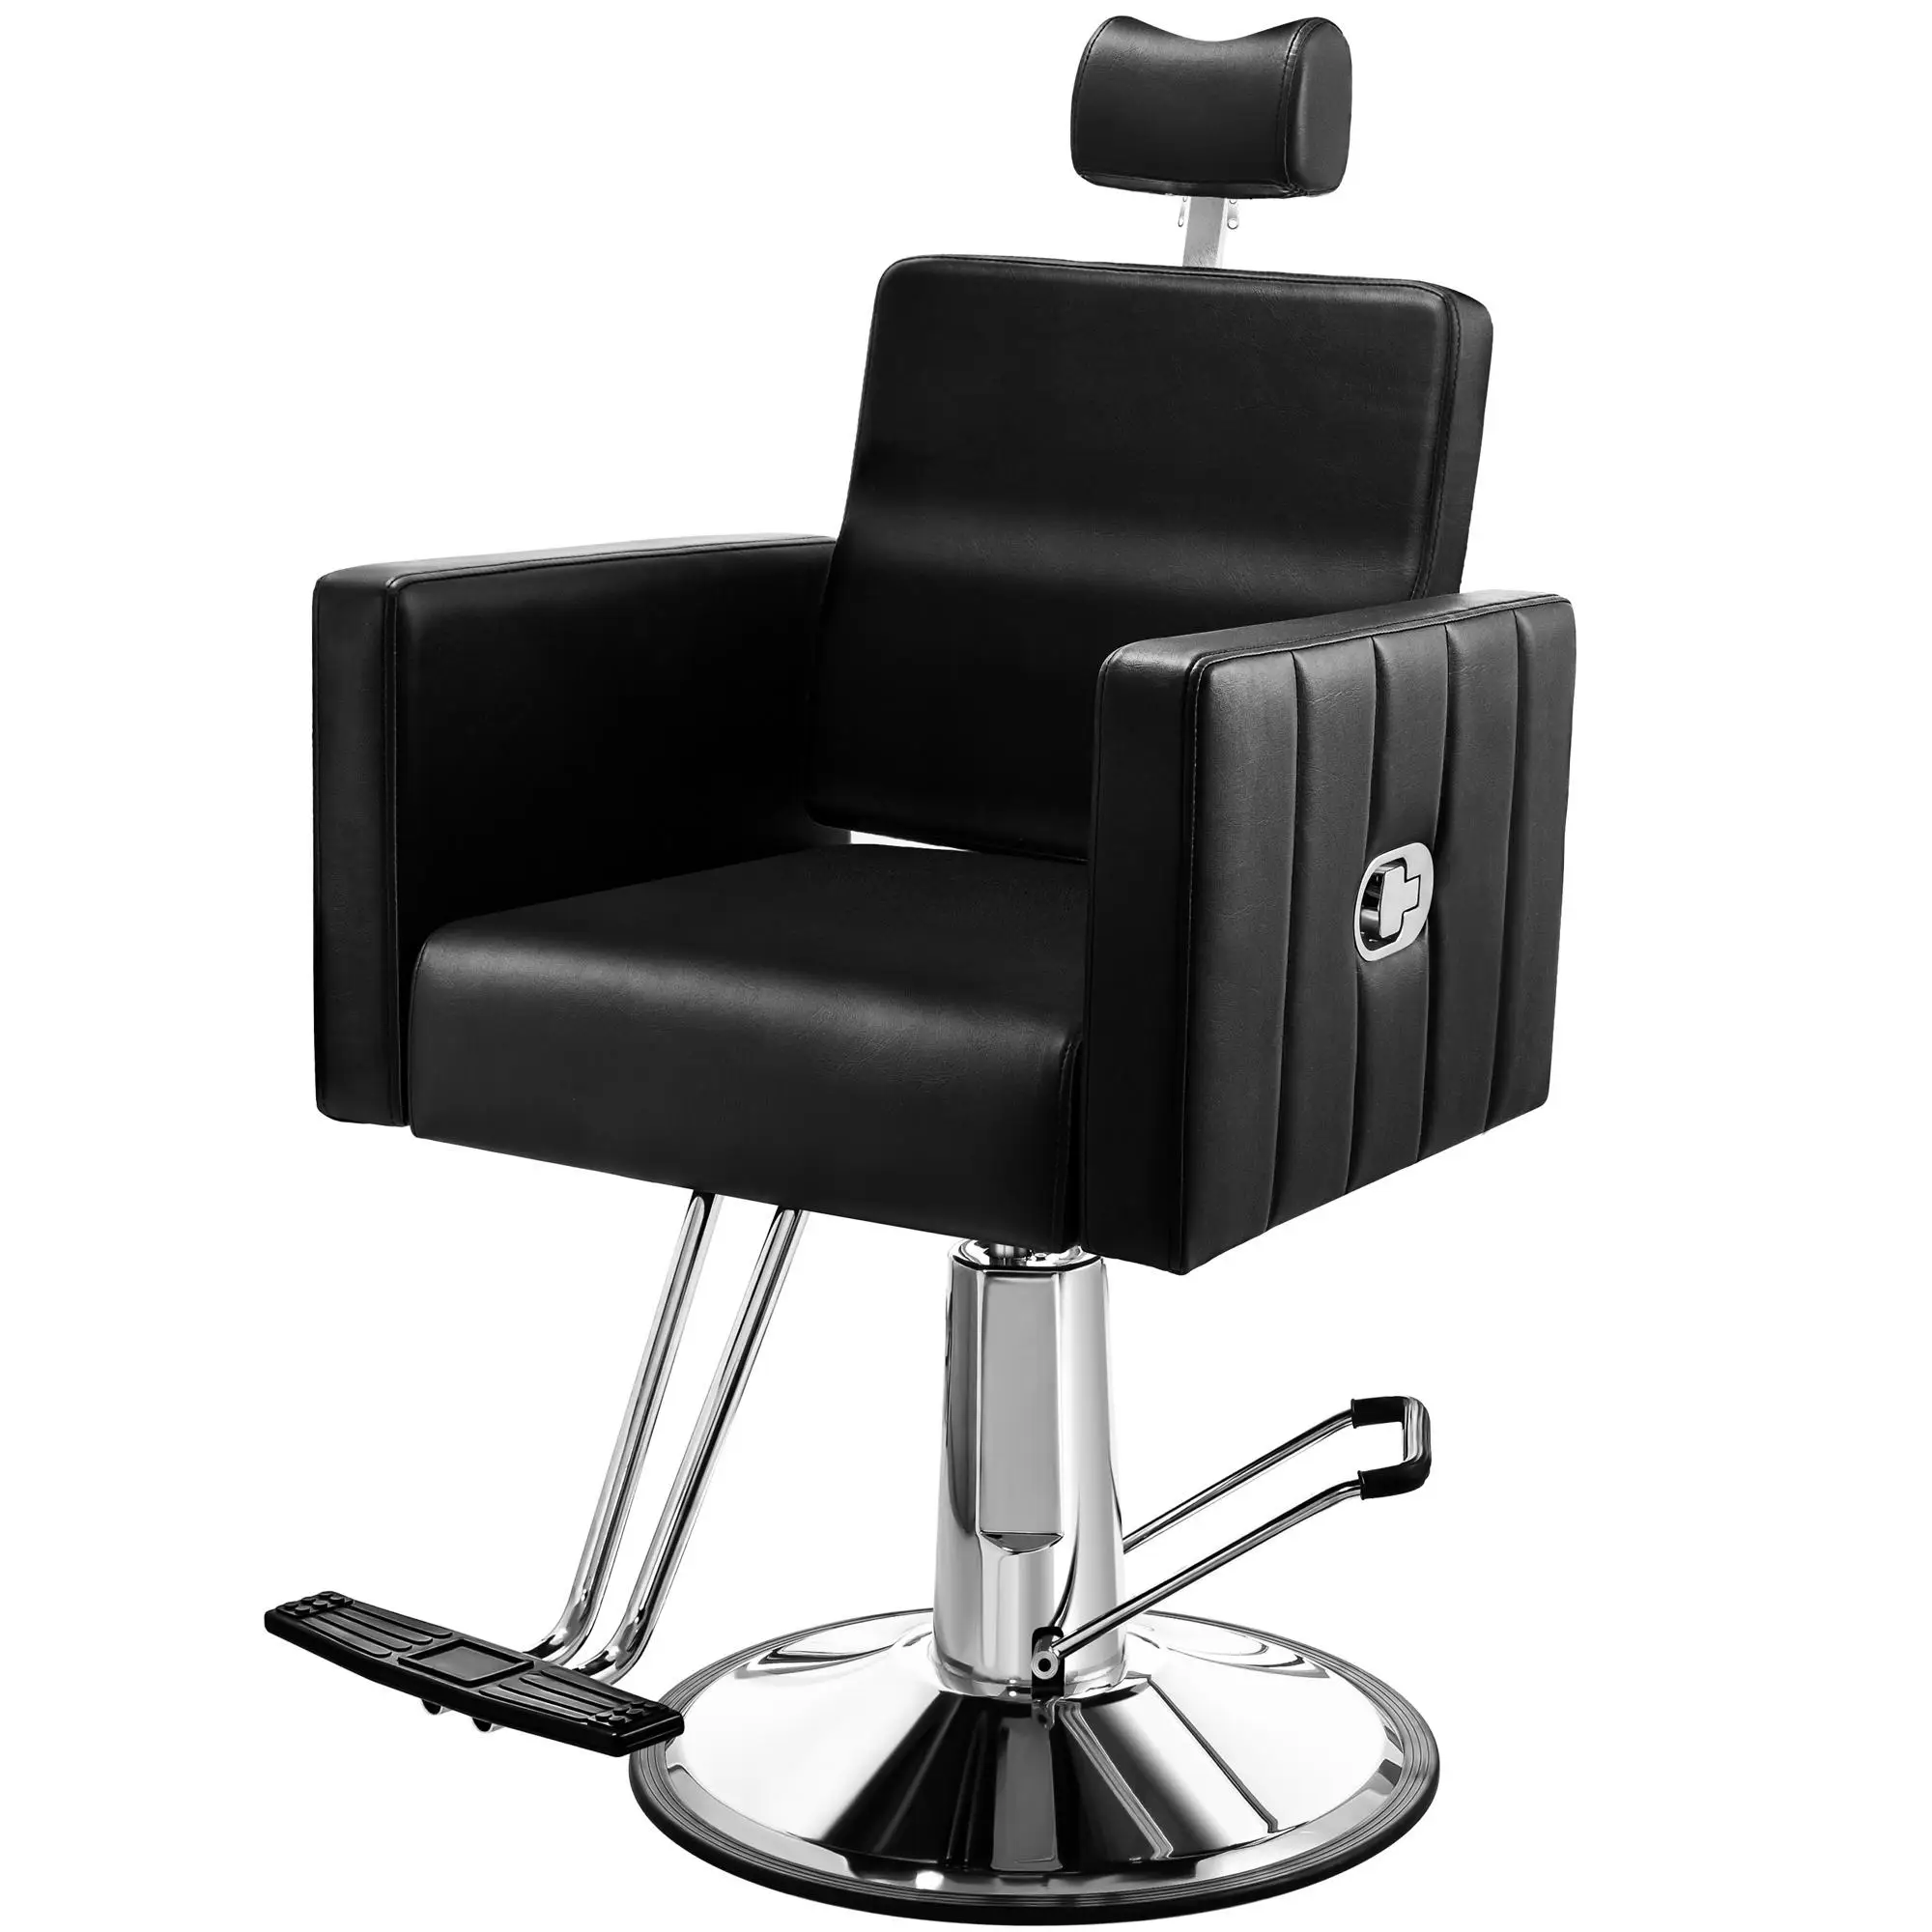 

Barber Chair, Baasha Reclining Chair for Hair Stylist, All Purpose Styling Chair with Heavy Duty Hydraulic Pump